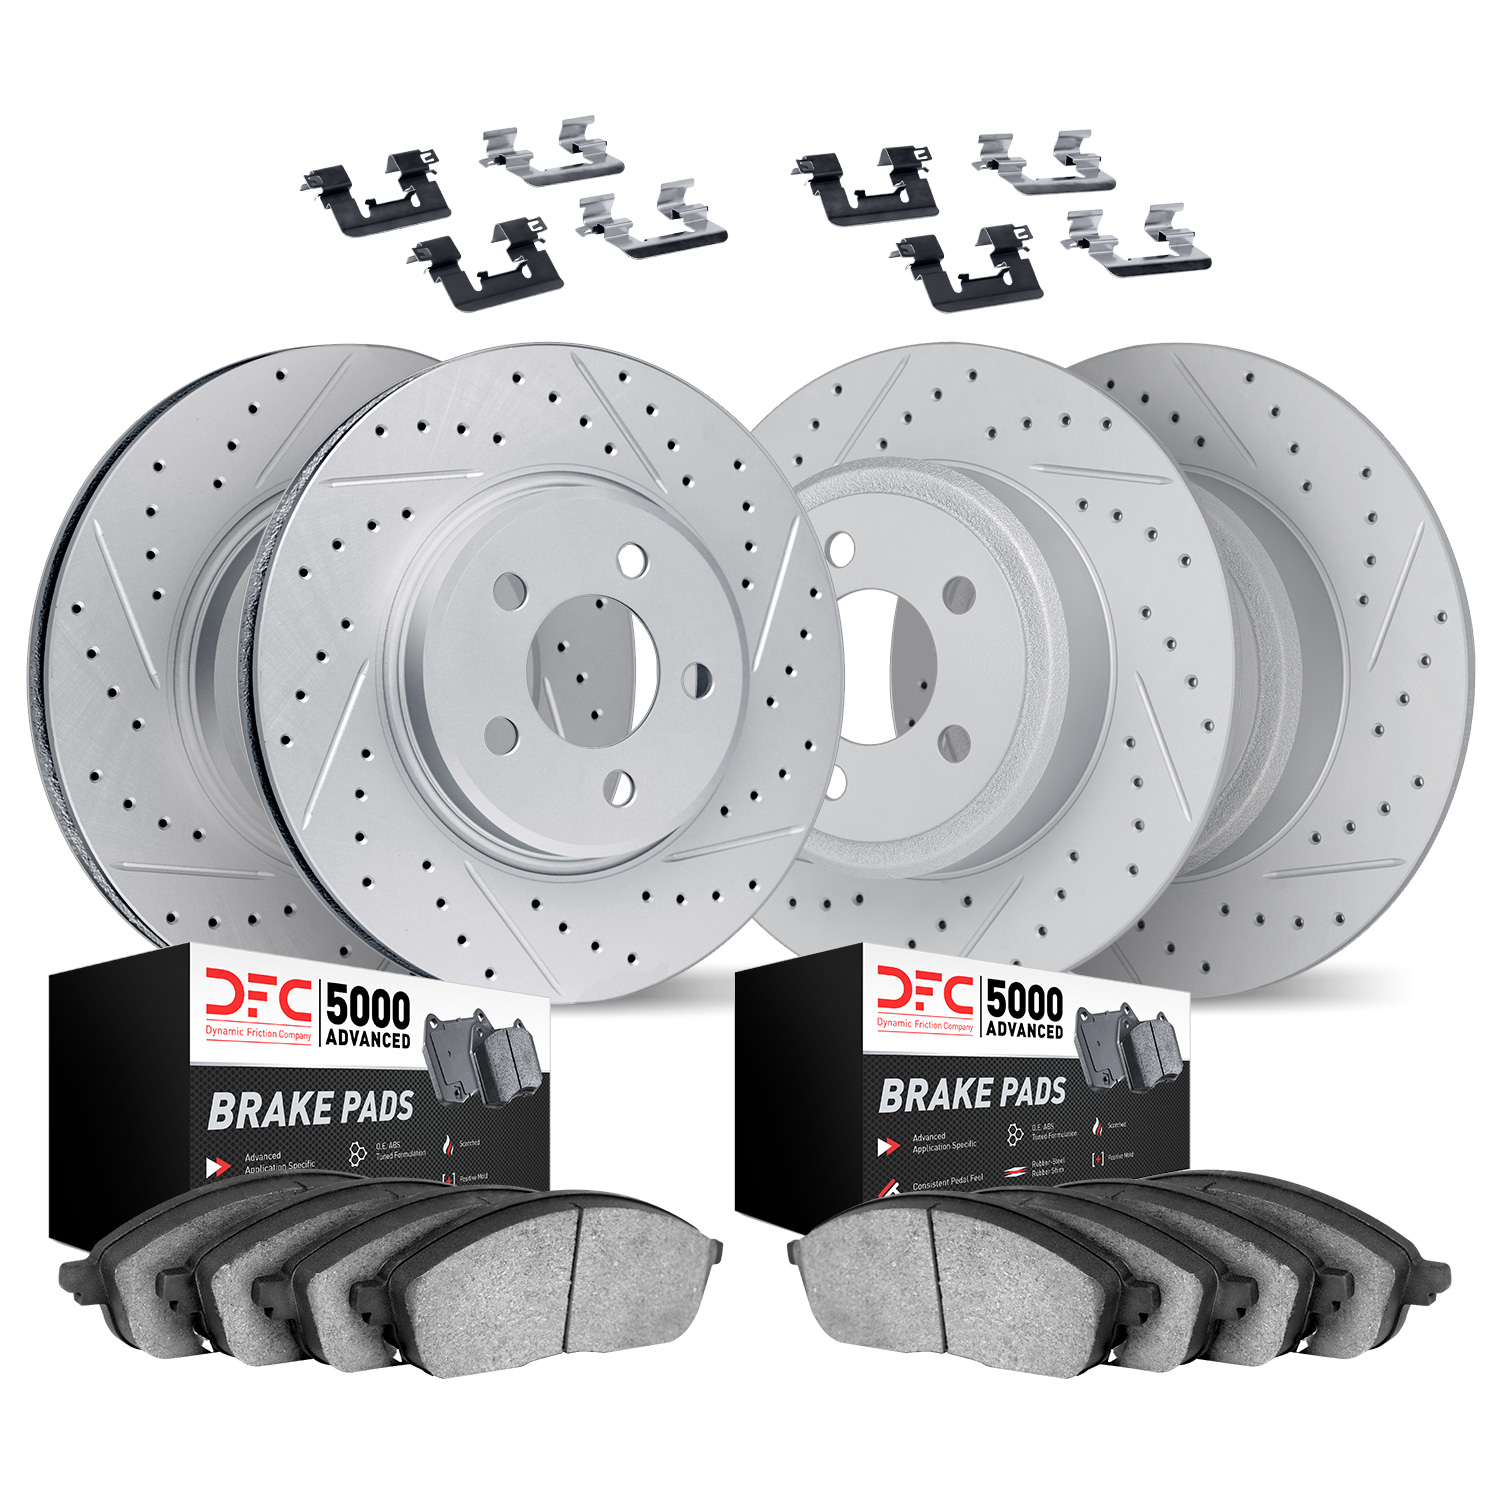 2514-32012 Geoperformance Drilled/Slotted Rotors w/5000 Advanced Brake Pads Kit & Hardware, Fits Select Mini, Position: Front an